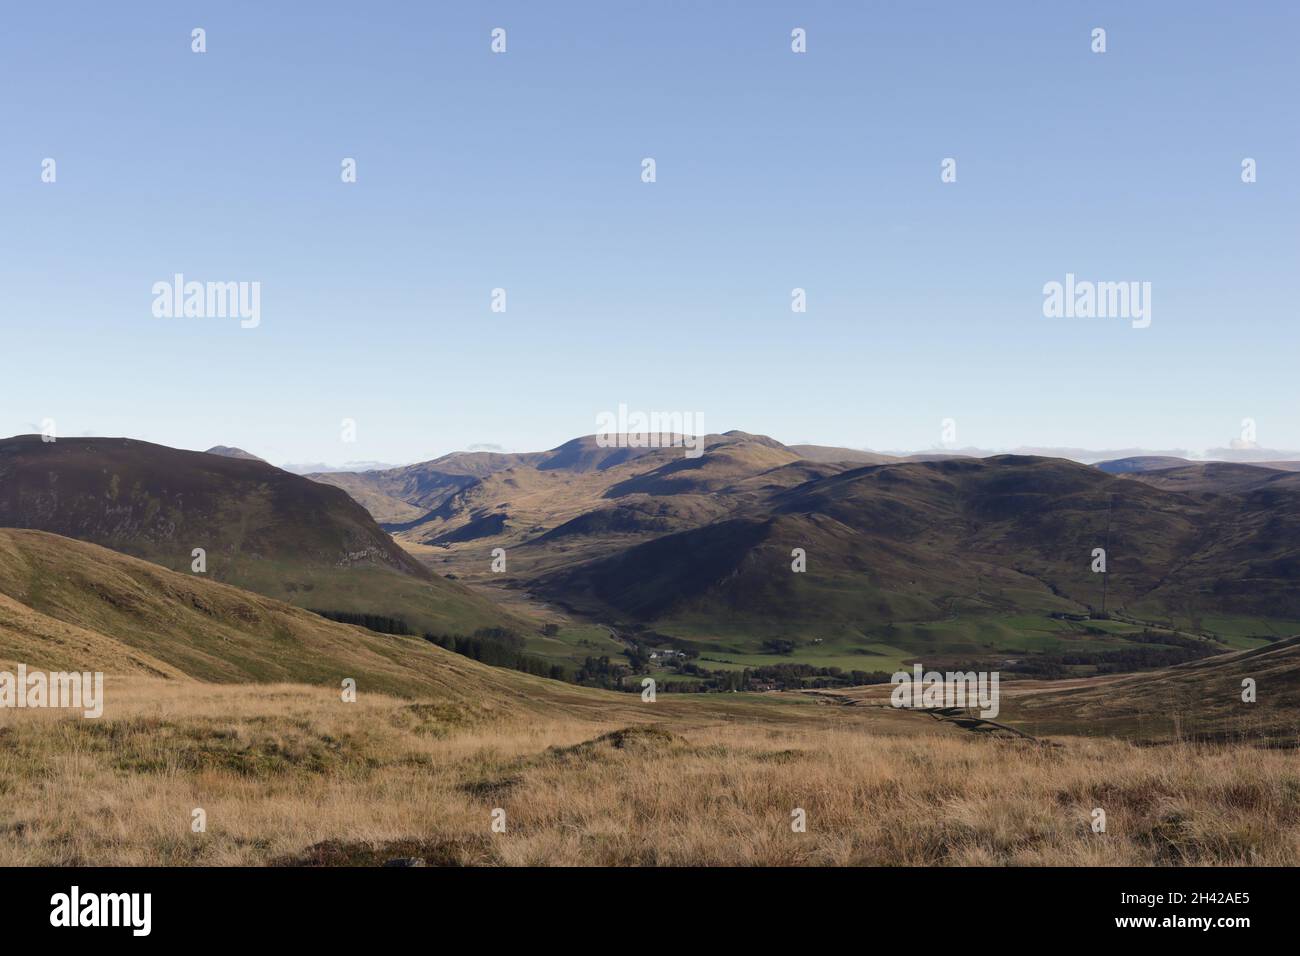 The highest point on the Cateran Trail is a pass in the mountains between Enochdu and Spittal of Glenshee. The photograph shows the view to Spittal of Stock Photo